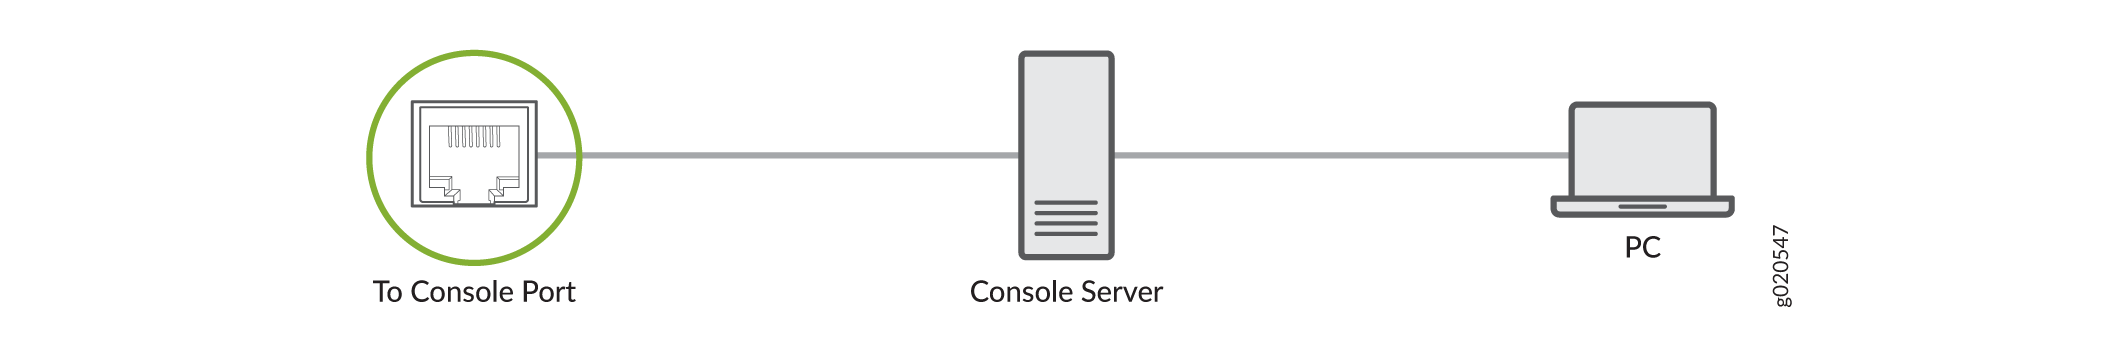 Connecting a router to a Management Console Through a Console Server